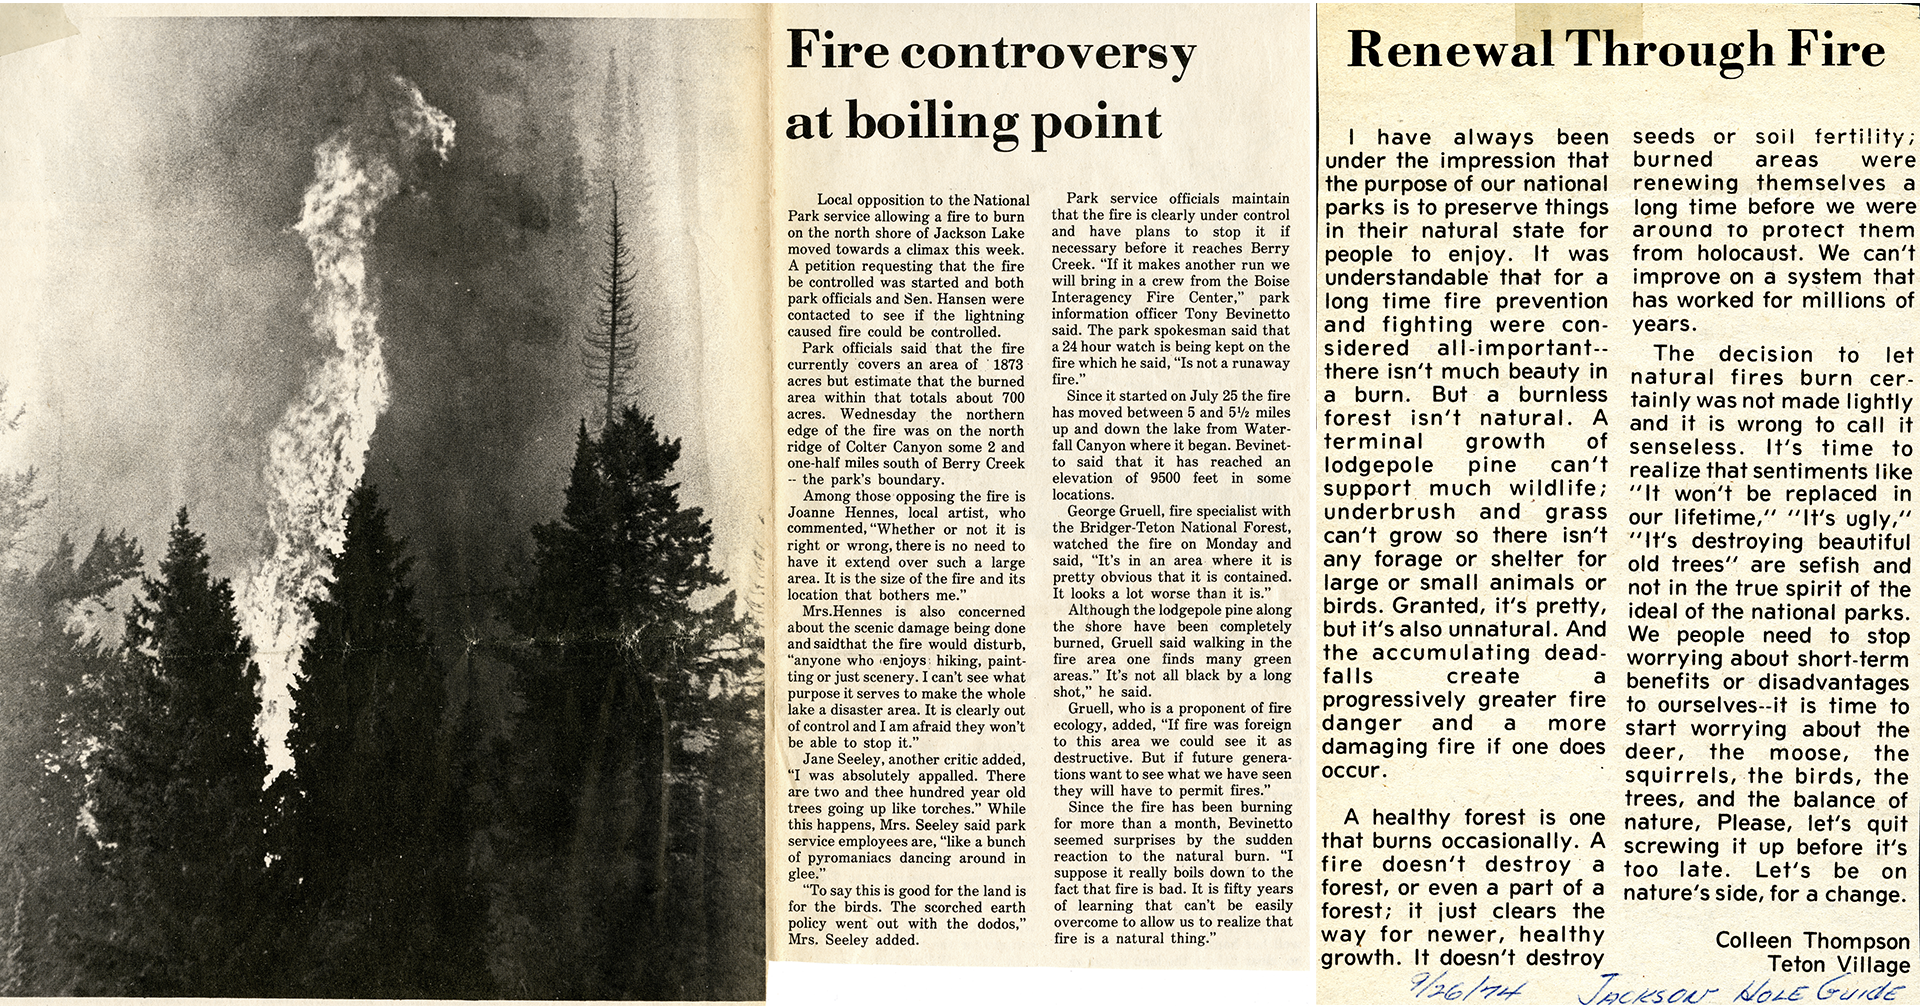 Two newspaper articles discuss the Waterfalls Canyon Fire, one positive and one negative.